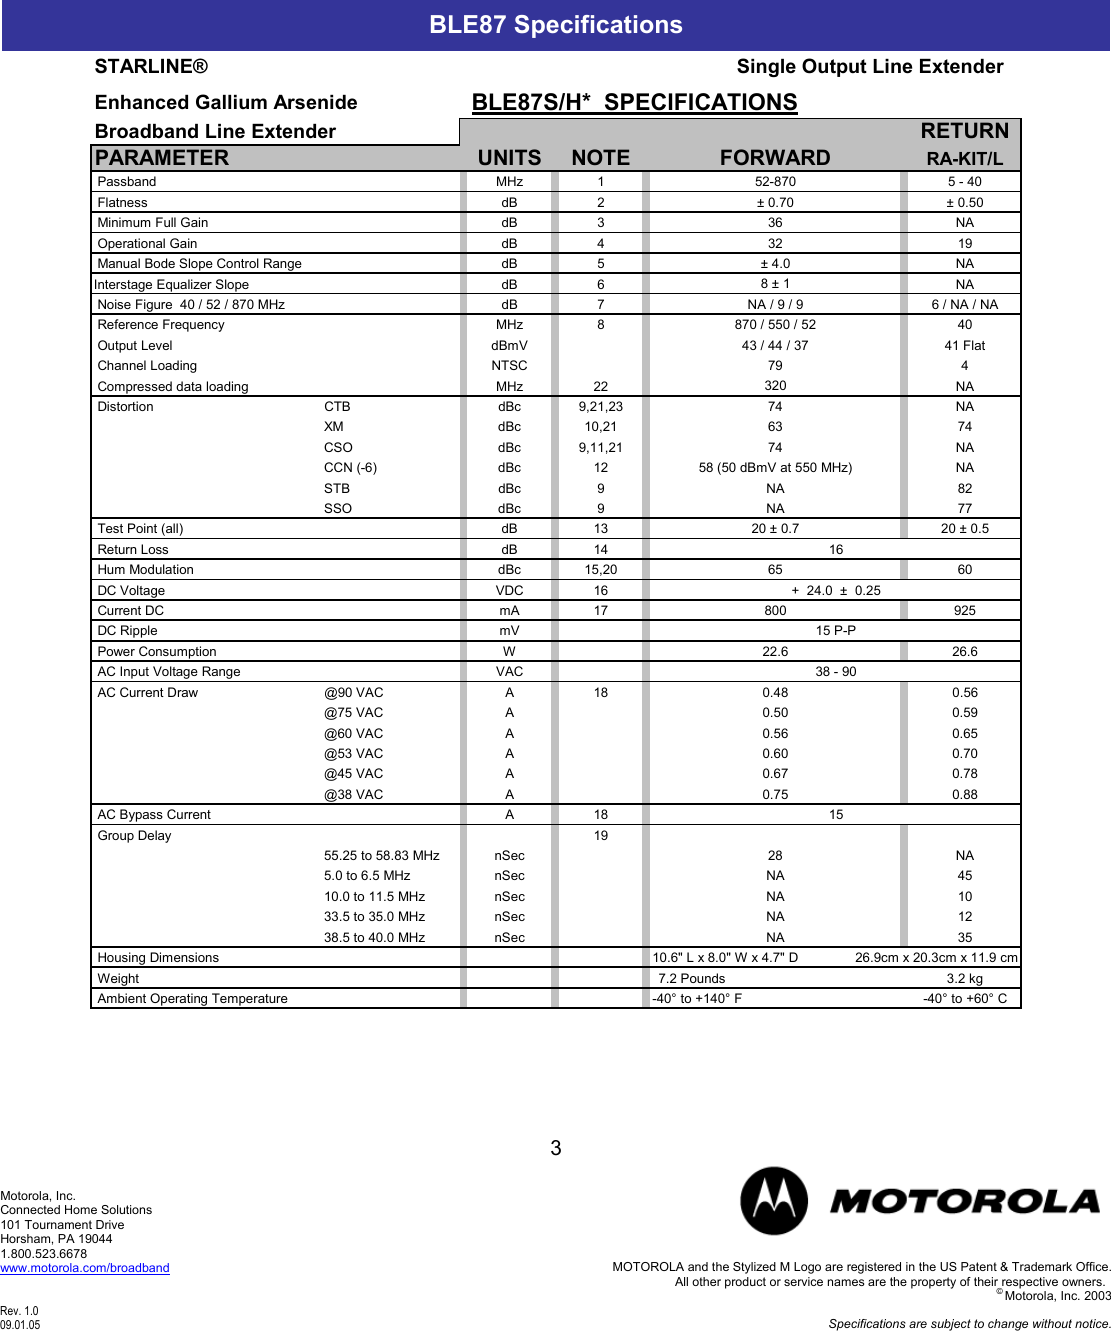 Page 3 of 9 - Motorola Motorola-Ble87-Users-Manual BLE_Catalog_Specifications_9-1-05